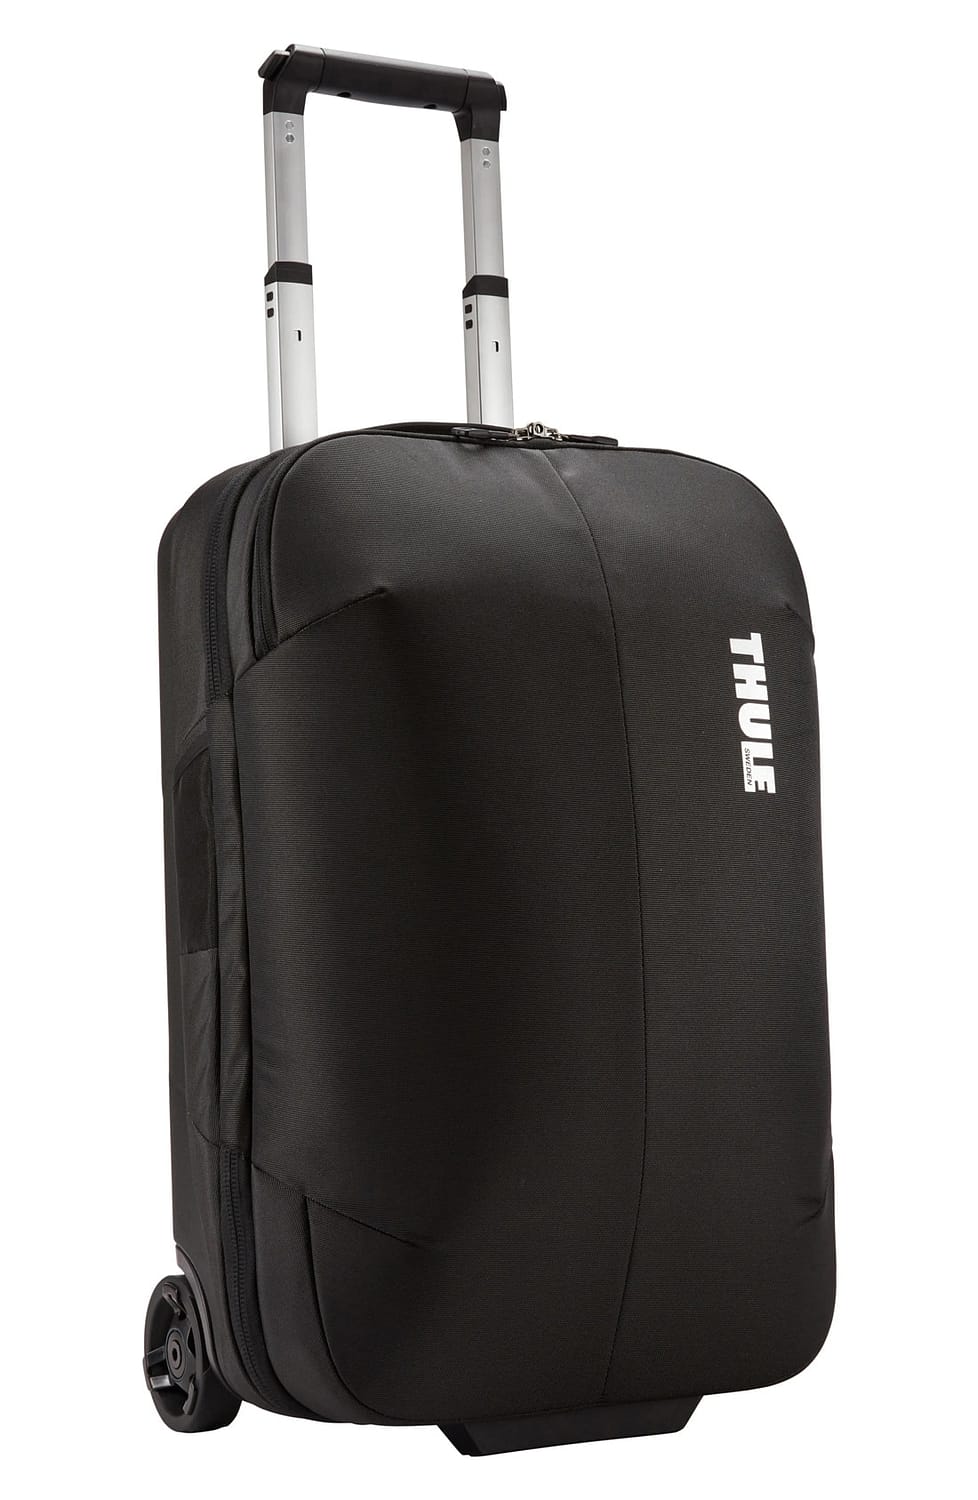 Best Two-Wheel Carry-On Luggage